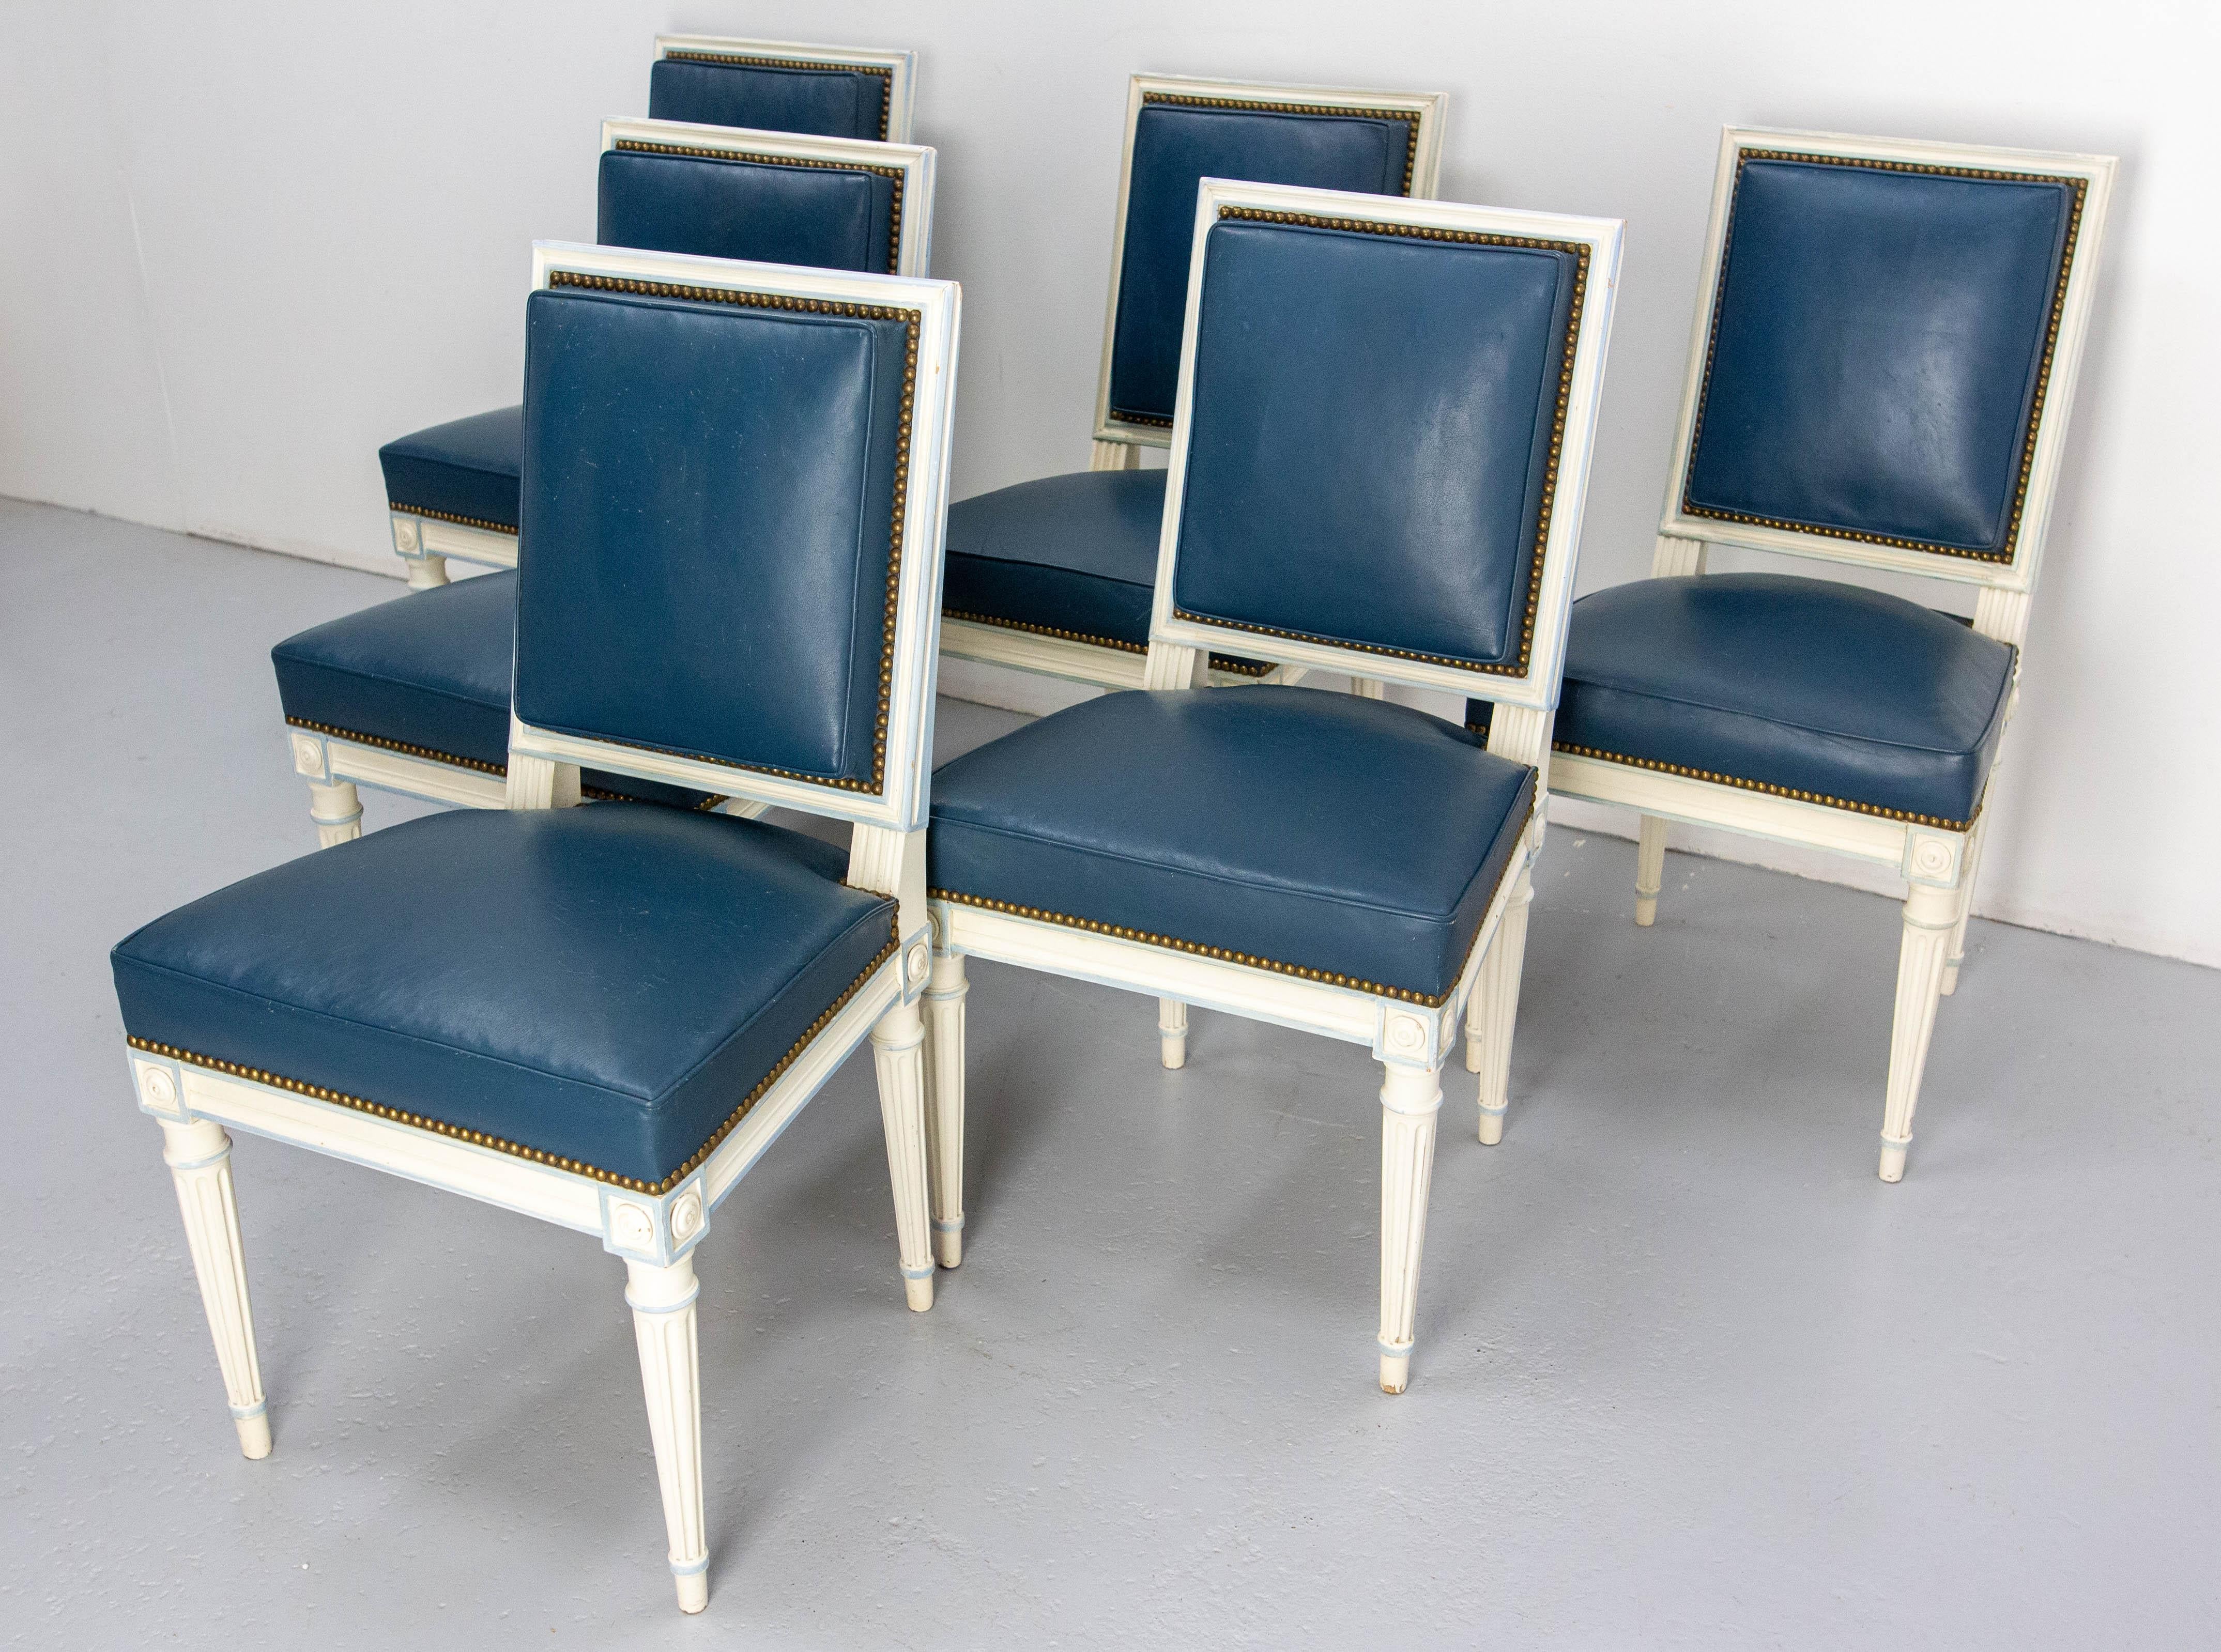 Six Dining Chairs Painted Wood & Blue Skai Louis 16 Style, Midcentury French In Good Condition For Sale In Labrit, Landes